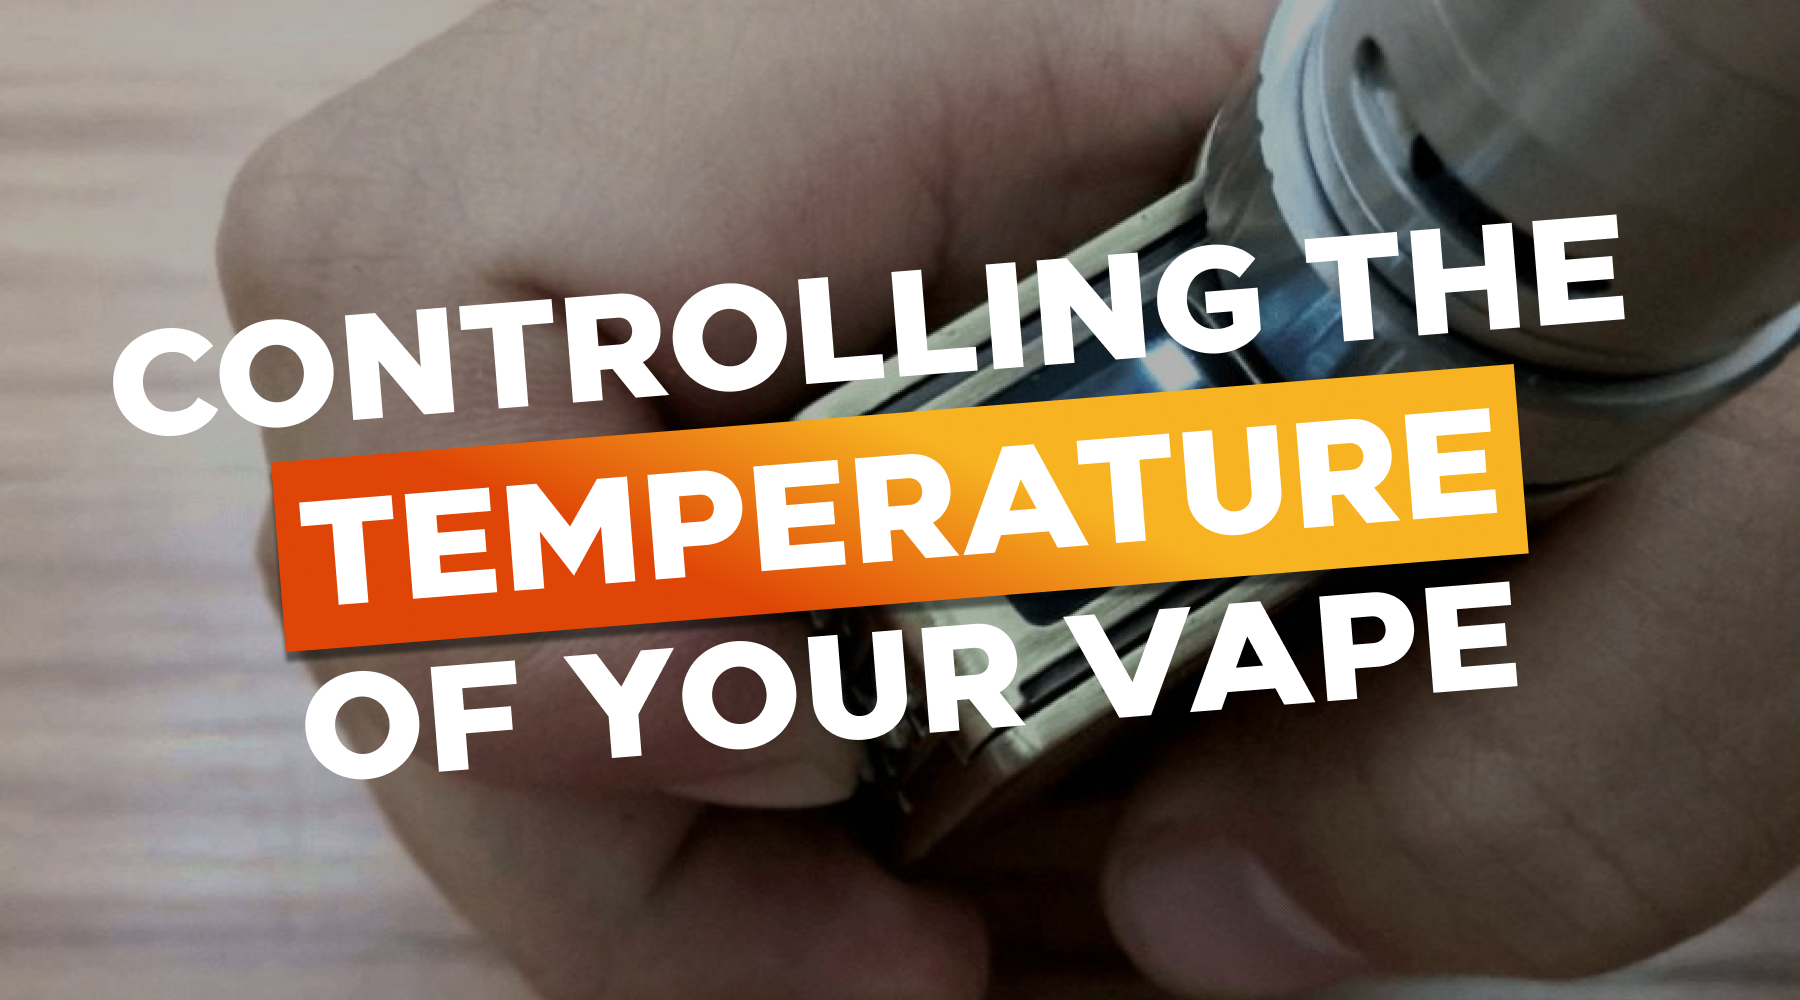 Controlling the Temperature of Your Vape